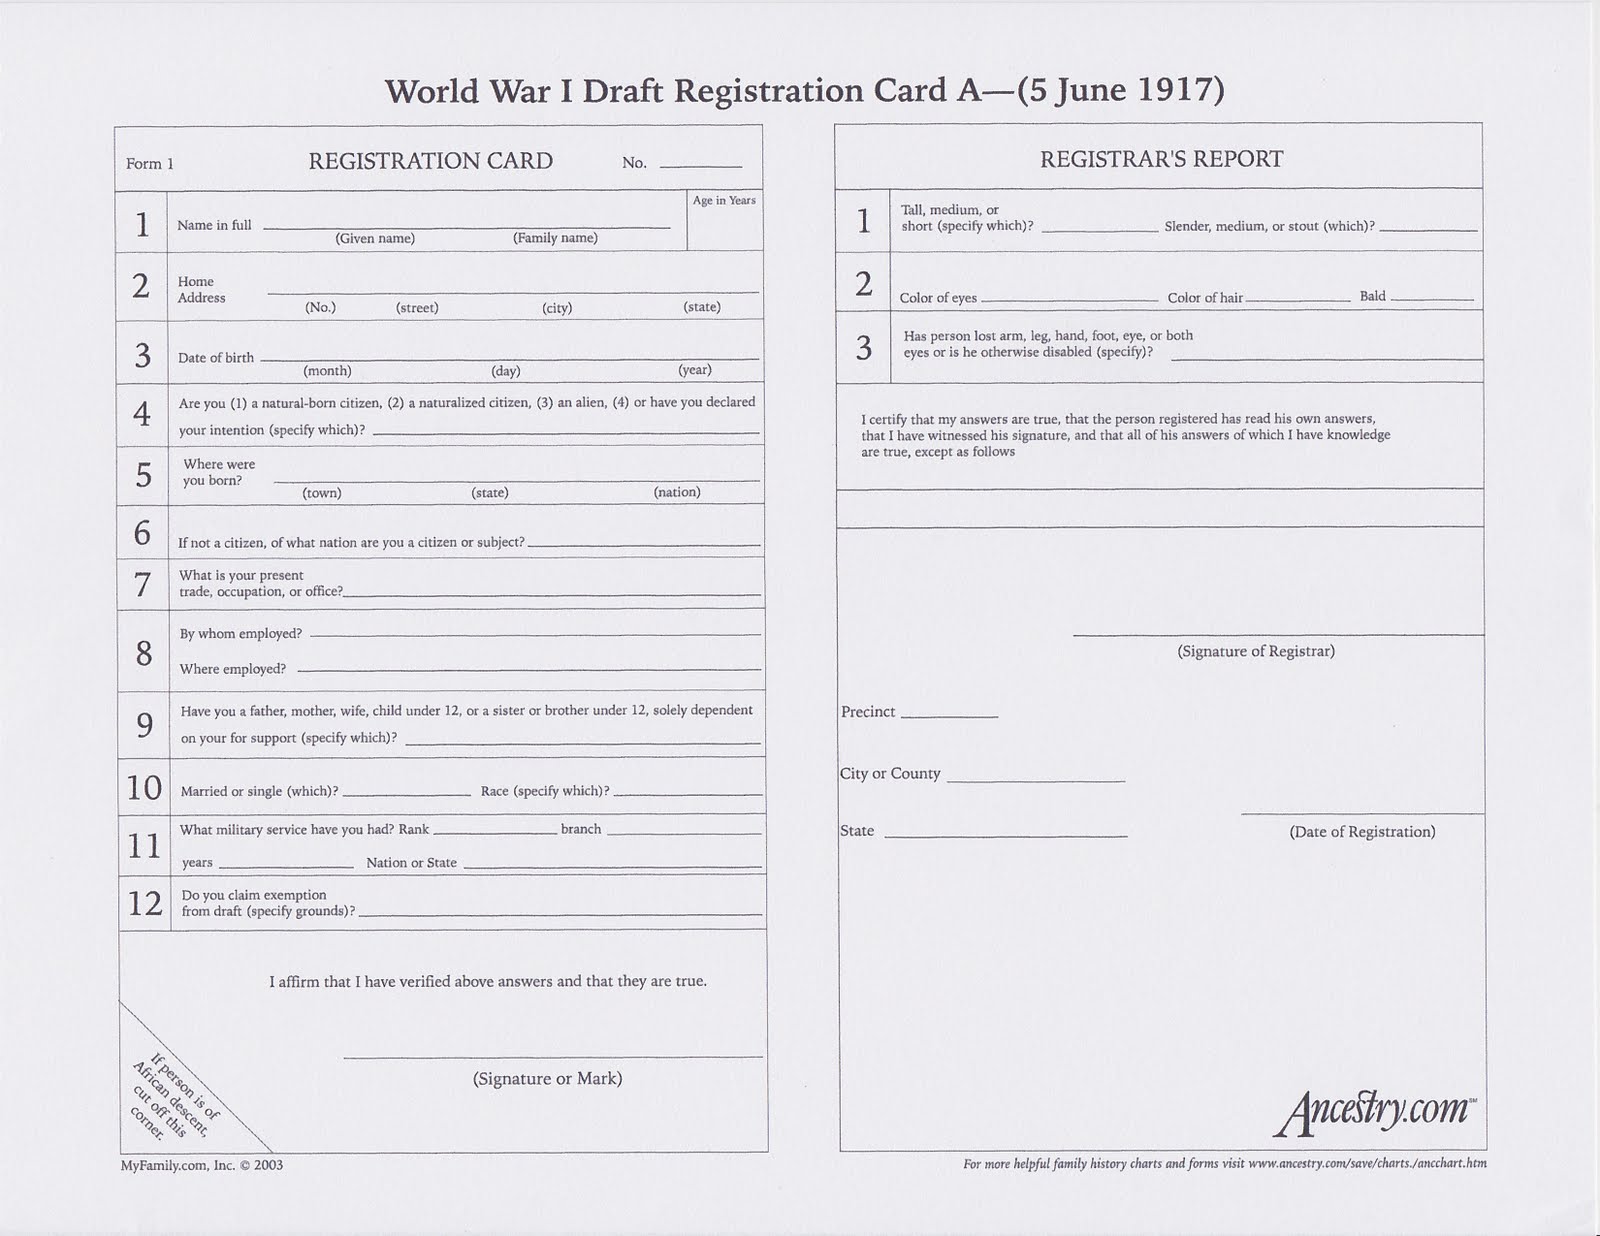 A blank registration card can